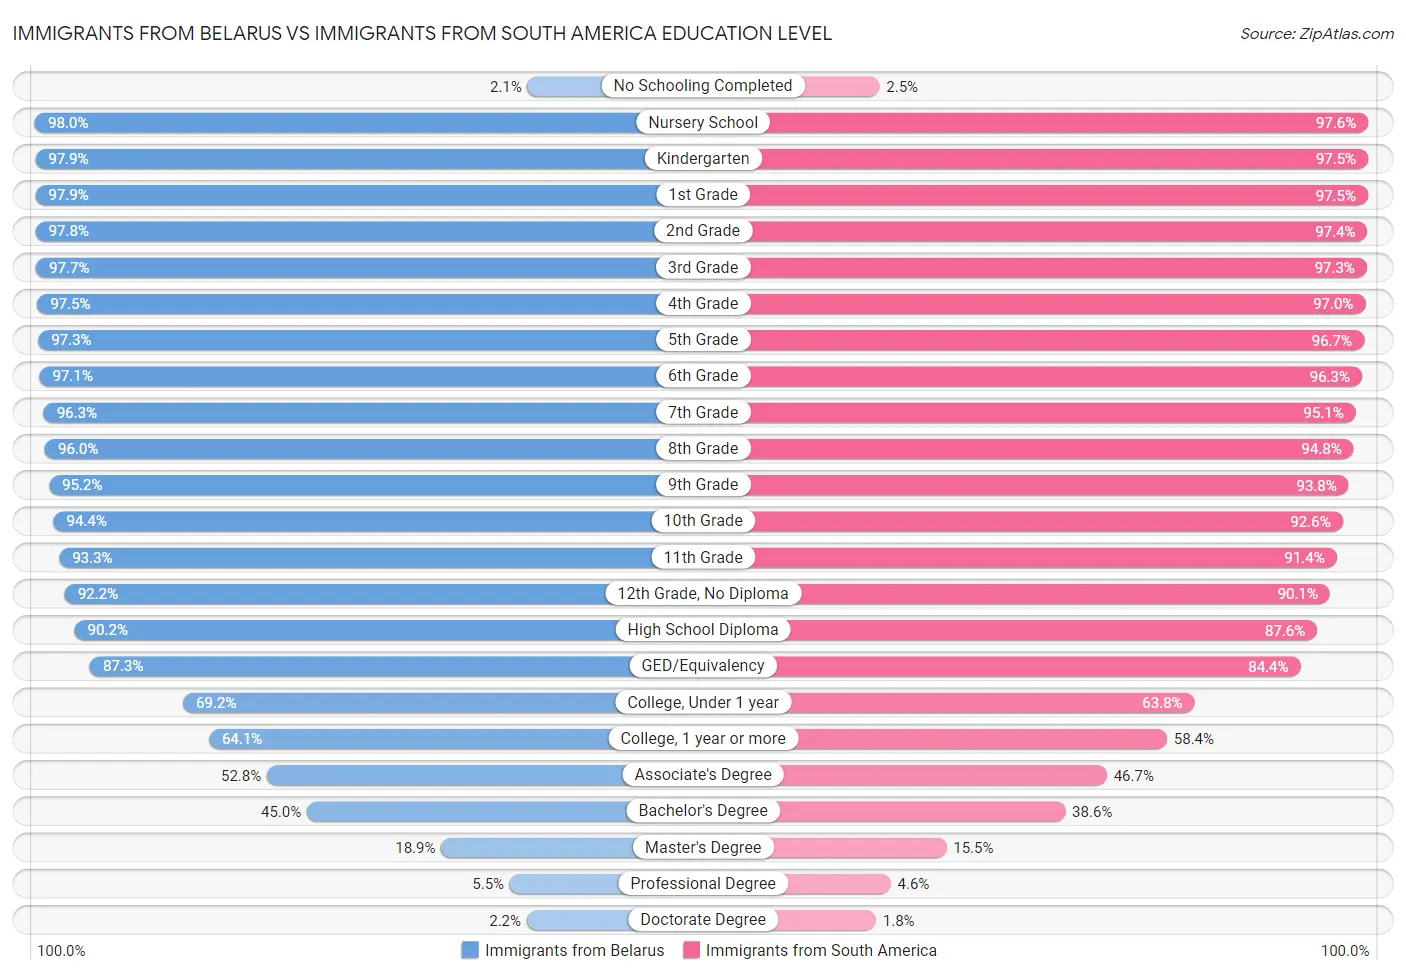 Immigrants from Belarus vs Immigrants from South America Education Level